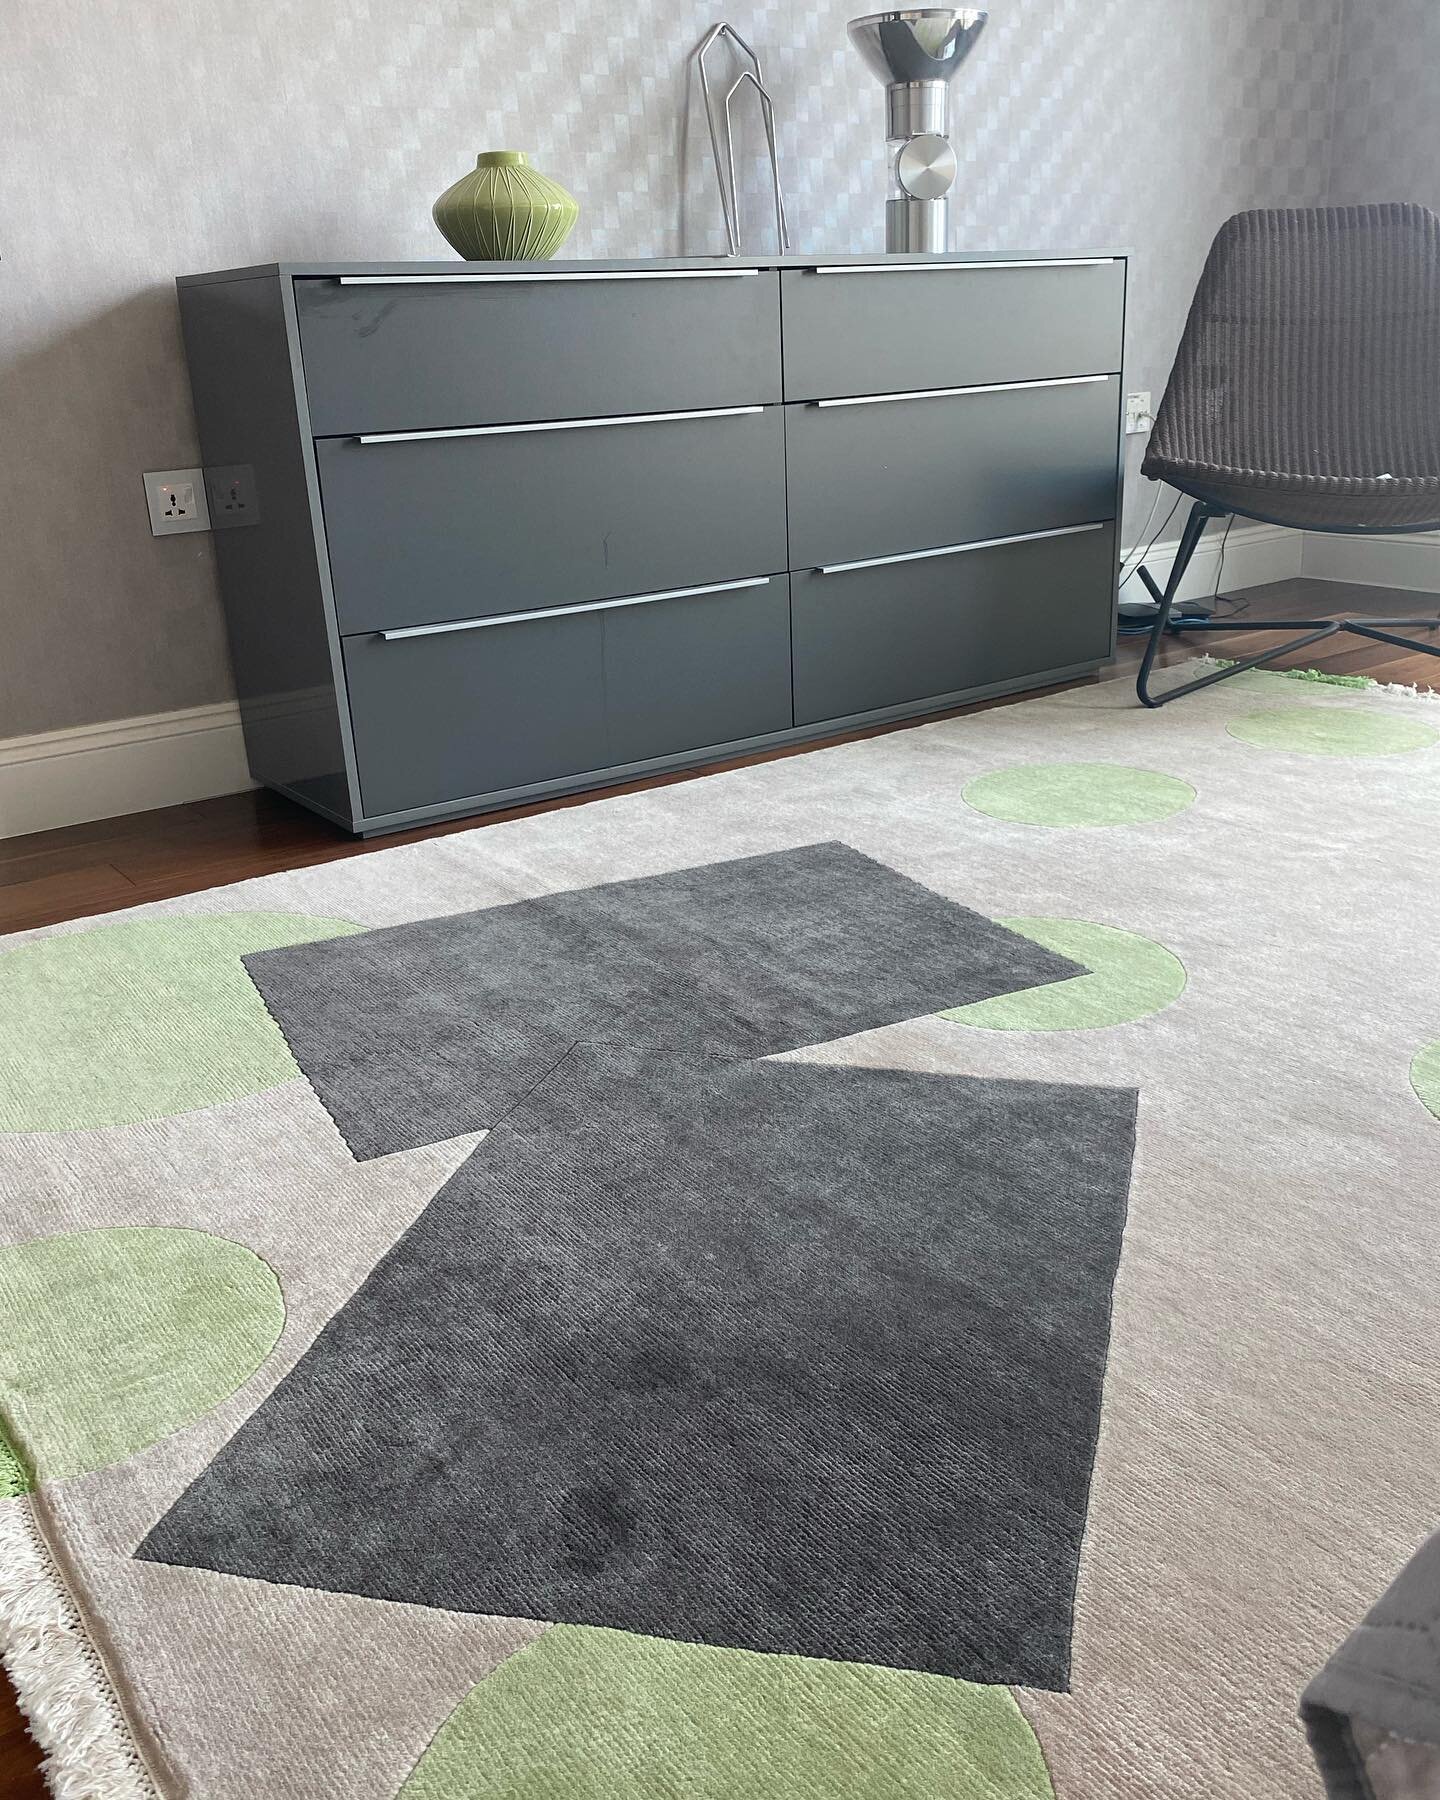 Art money Berlin, it&rsquo;s a hand knotted  rug in New Zealand wool .
The design continues out in the colored fringes.

#rug #carpet #greendots #design #interior #interiordesign #arcarpet #homedecor #home #geometricart #carpetscc #ceciliasetterdahld